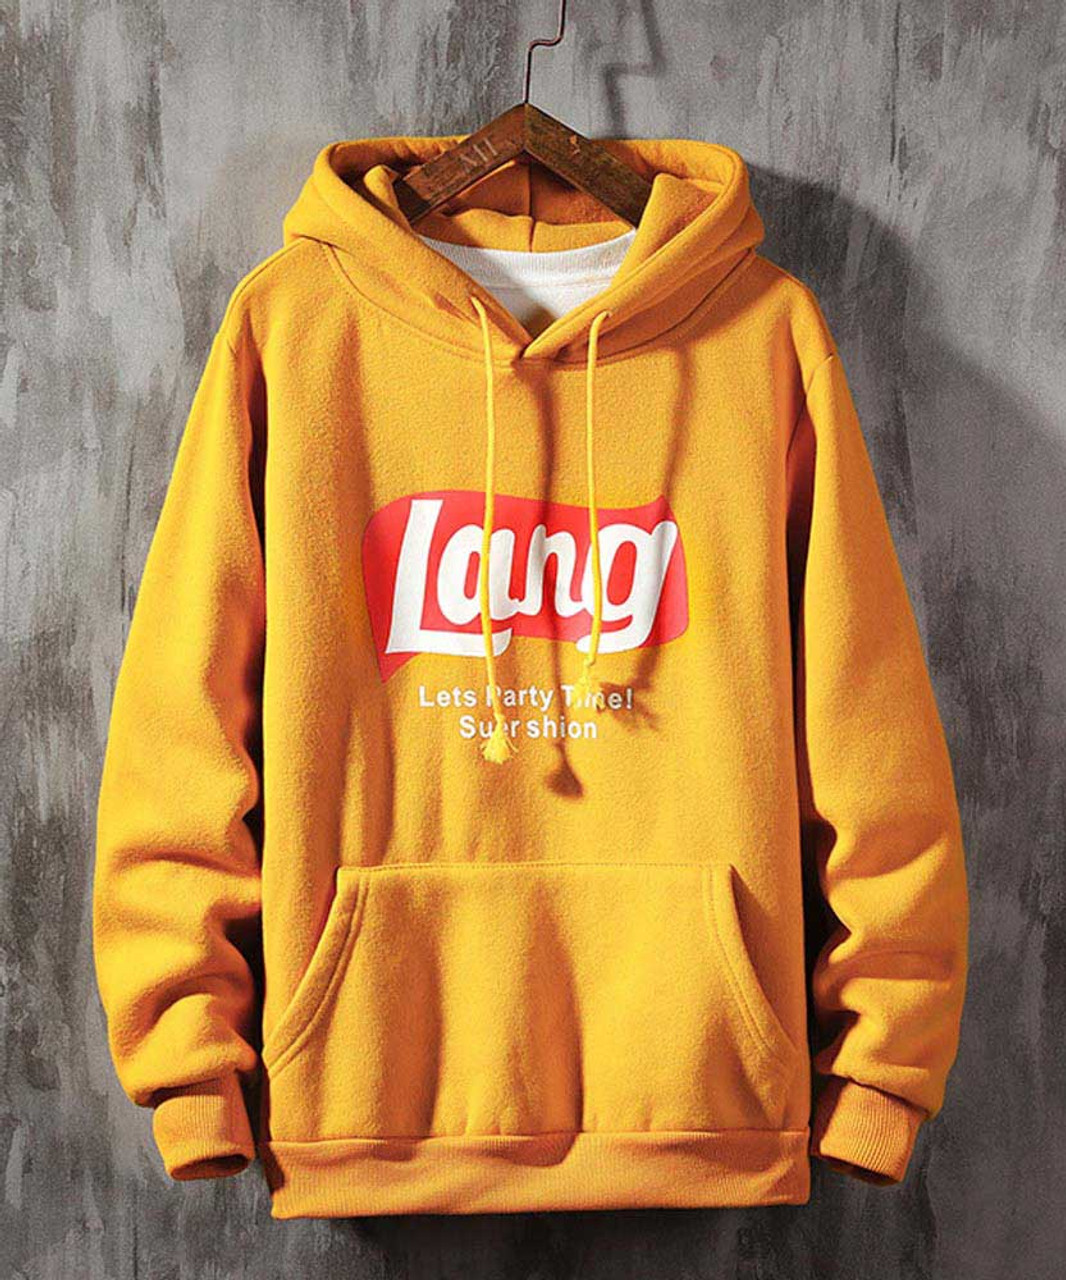 Yellow lets party time print hoodies with pouch pocket | Mens hoodies ...